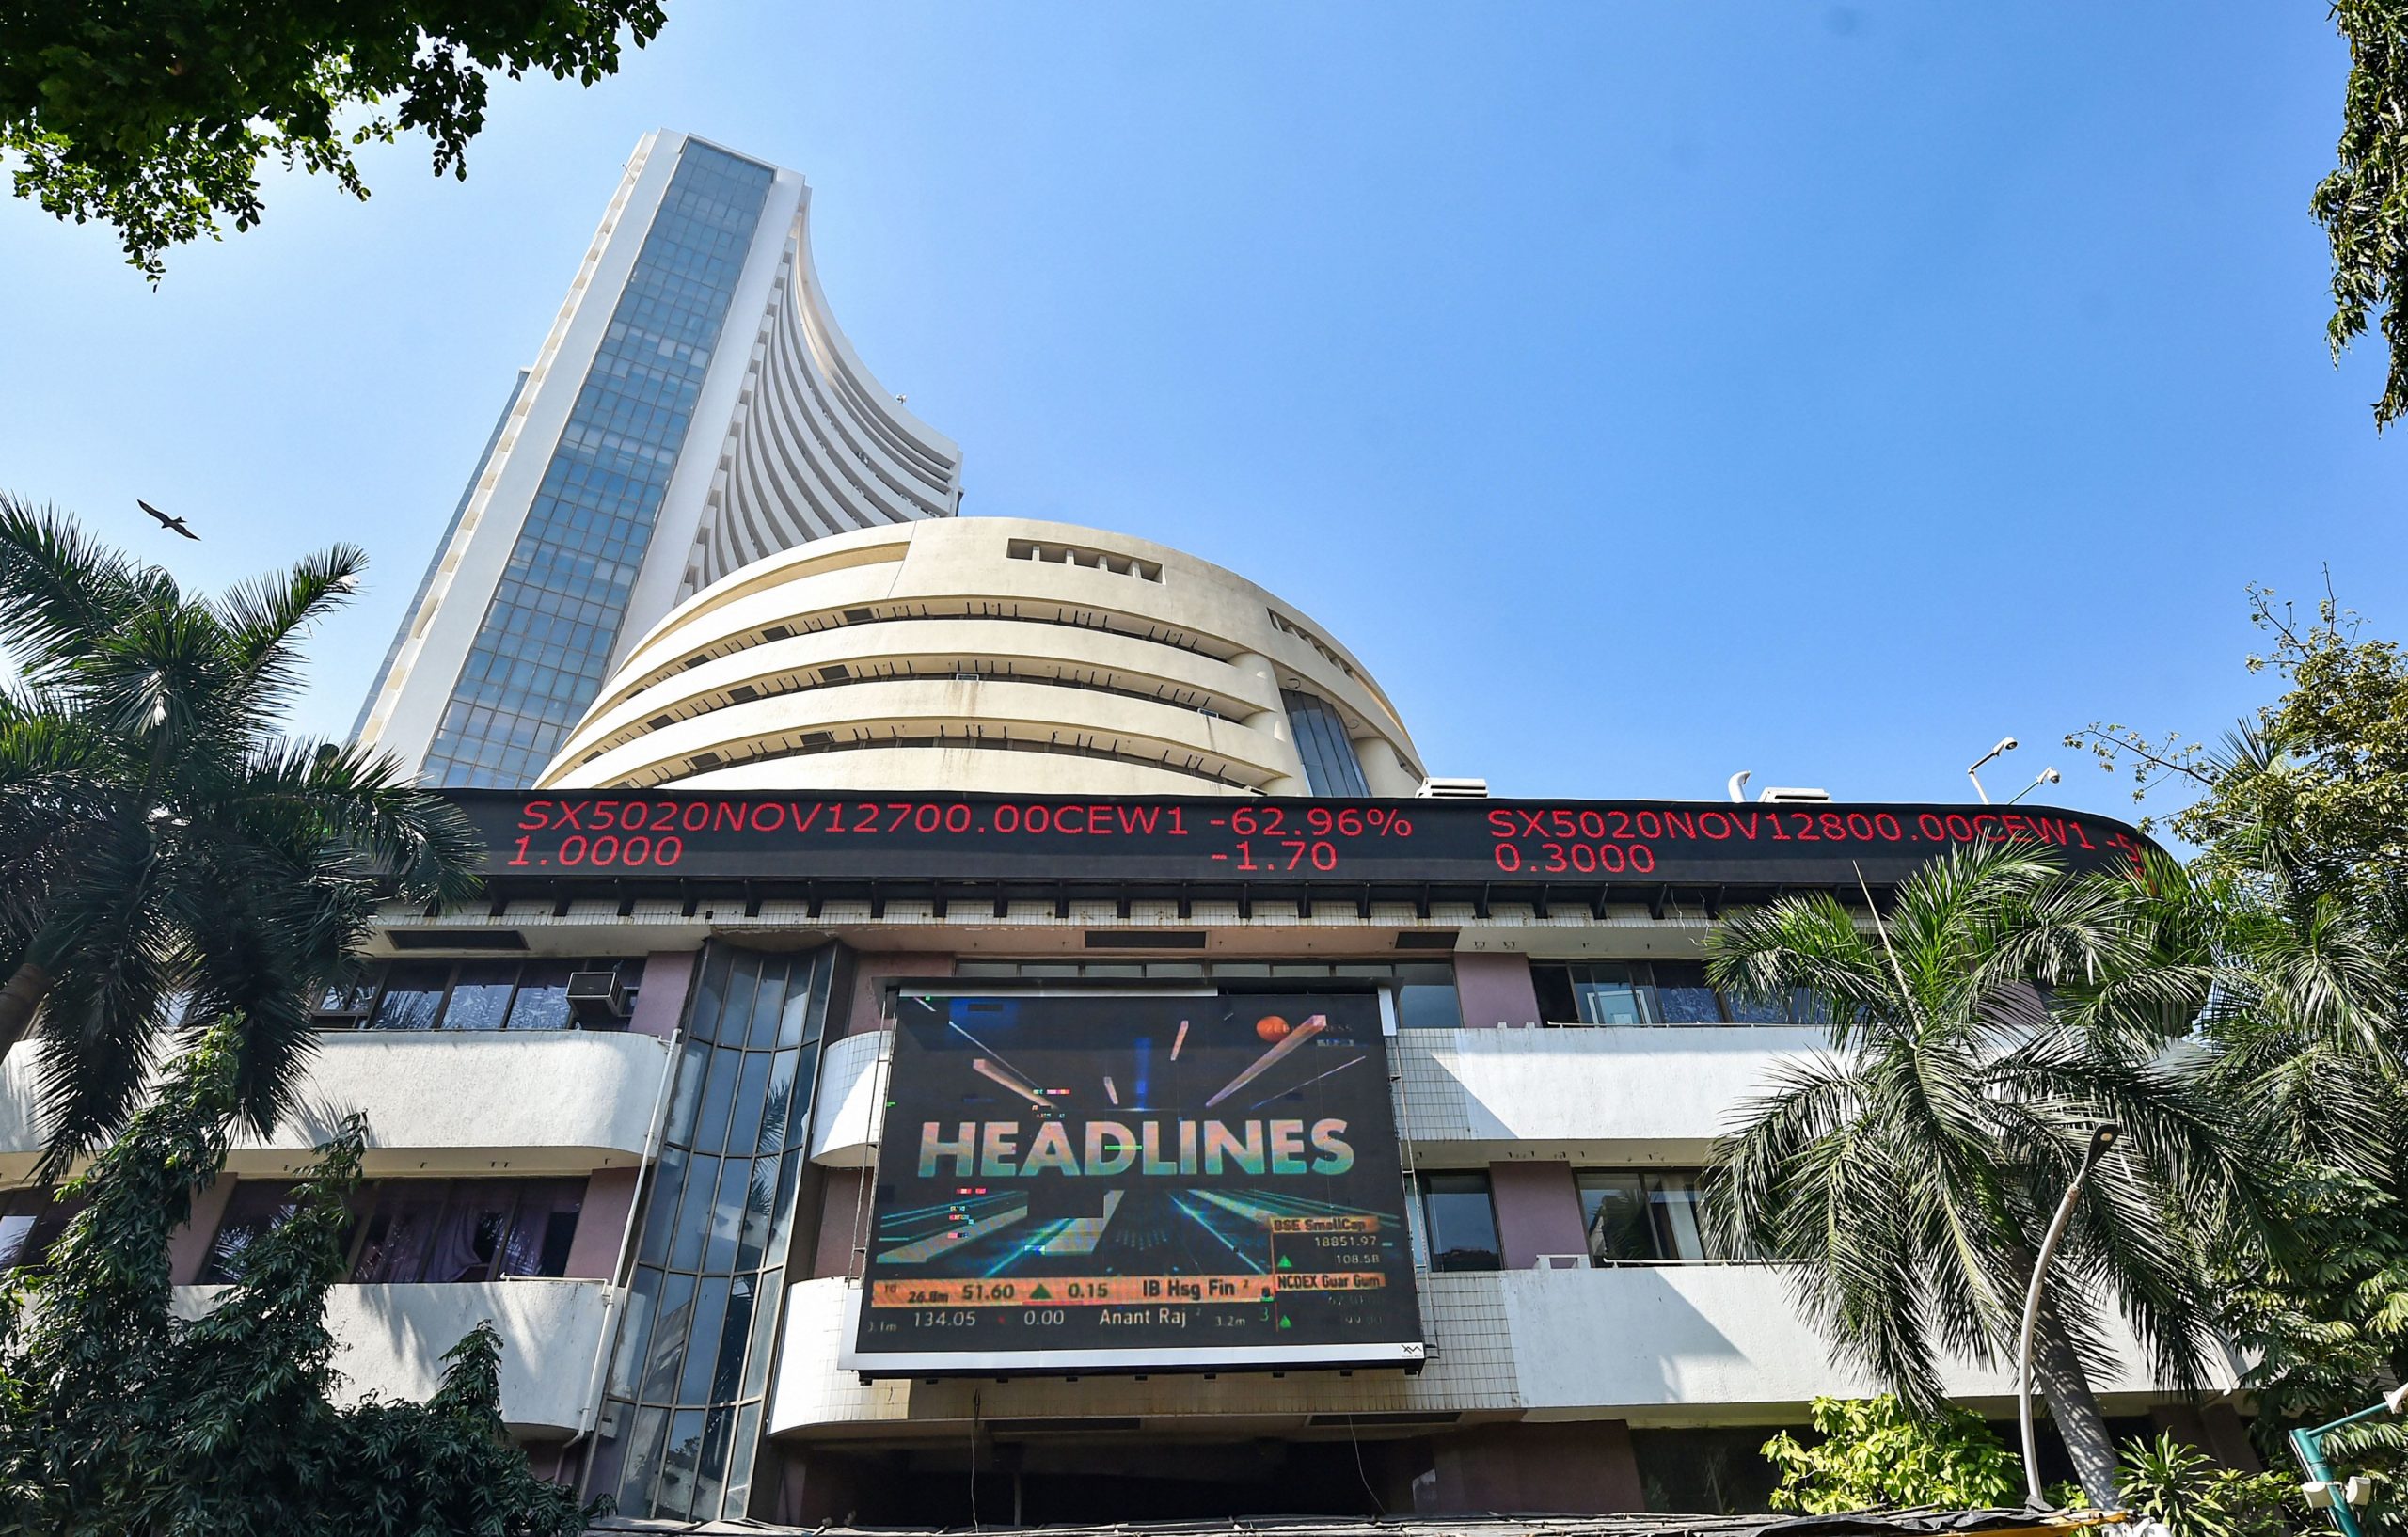 Trending Stocks: Tata Steel, Gland Pharma, RIIL, ICICI and others in news today